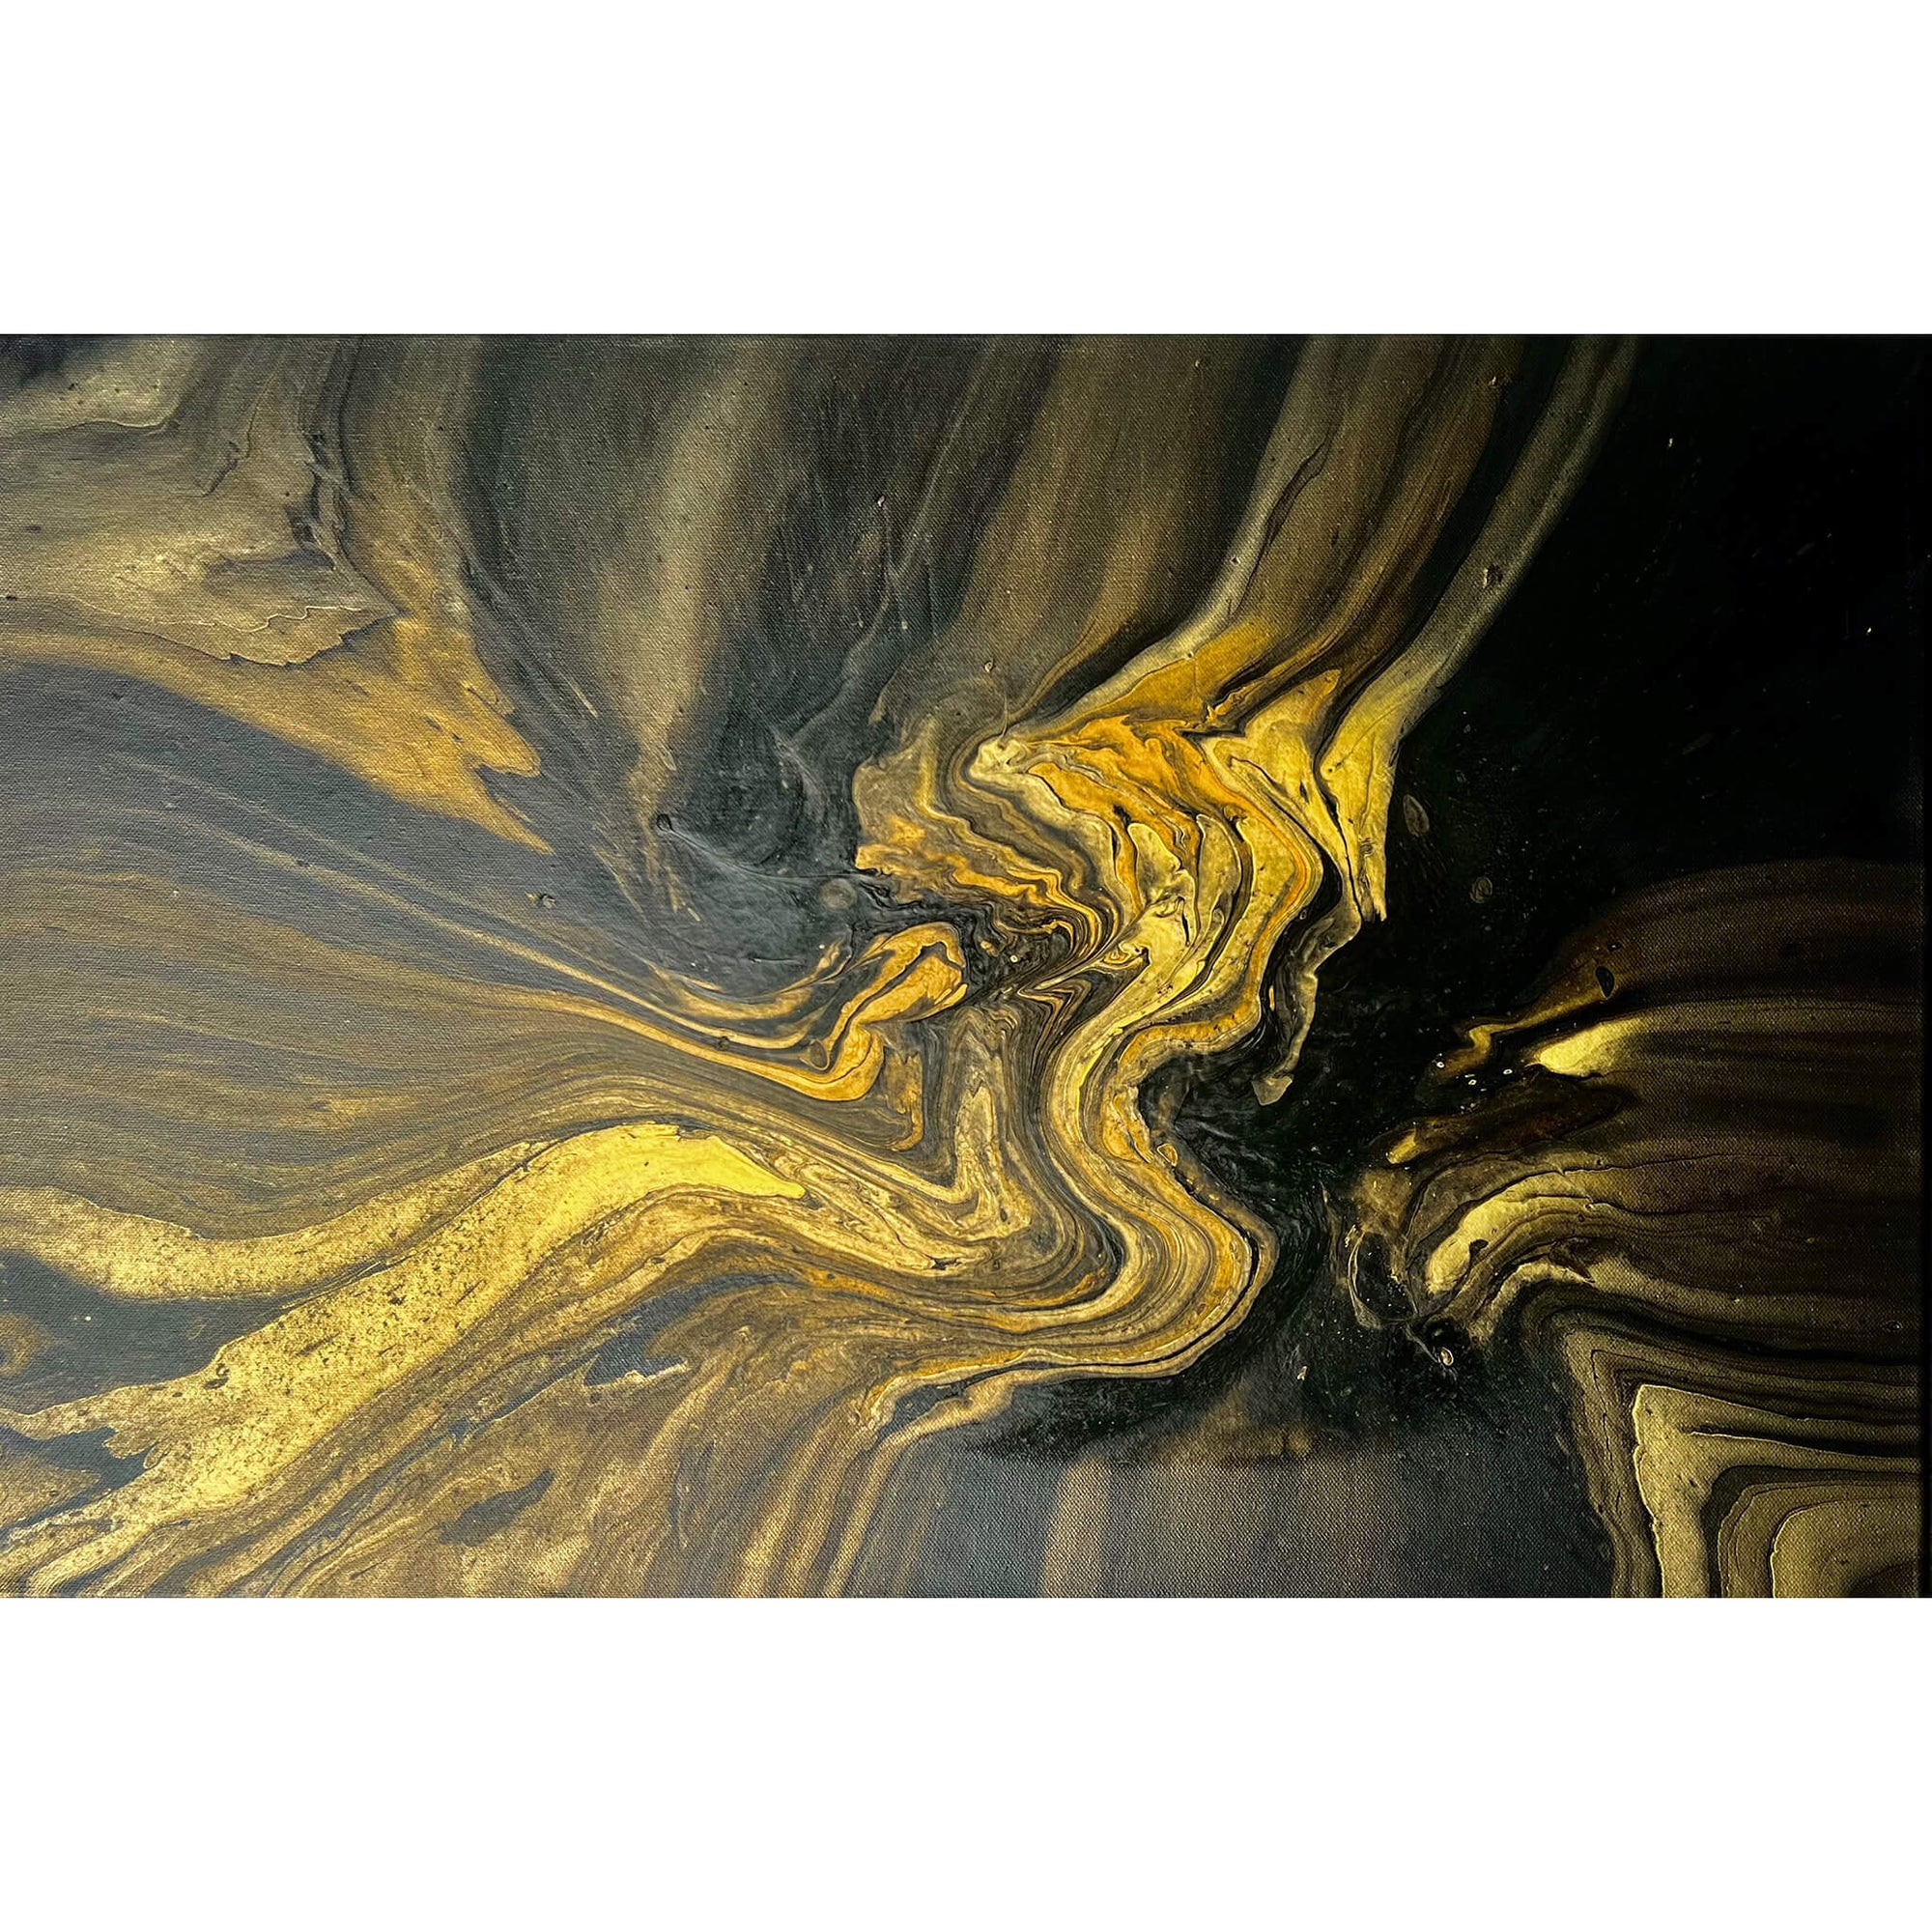 An original acrylic on canvas yellow, gold and black artwork by Vicki Demirdjian